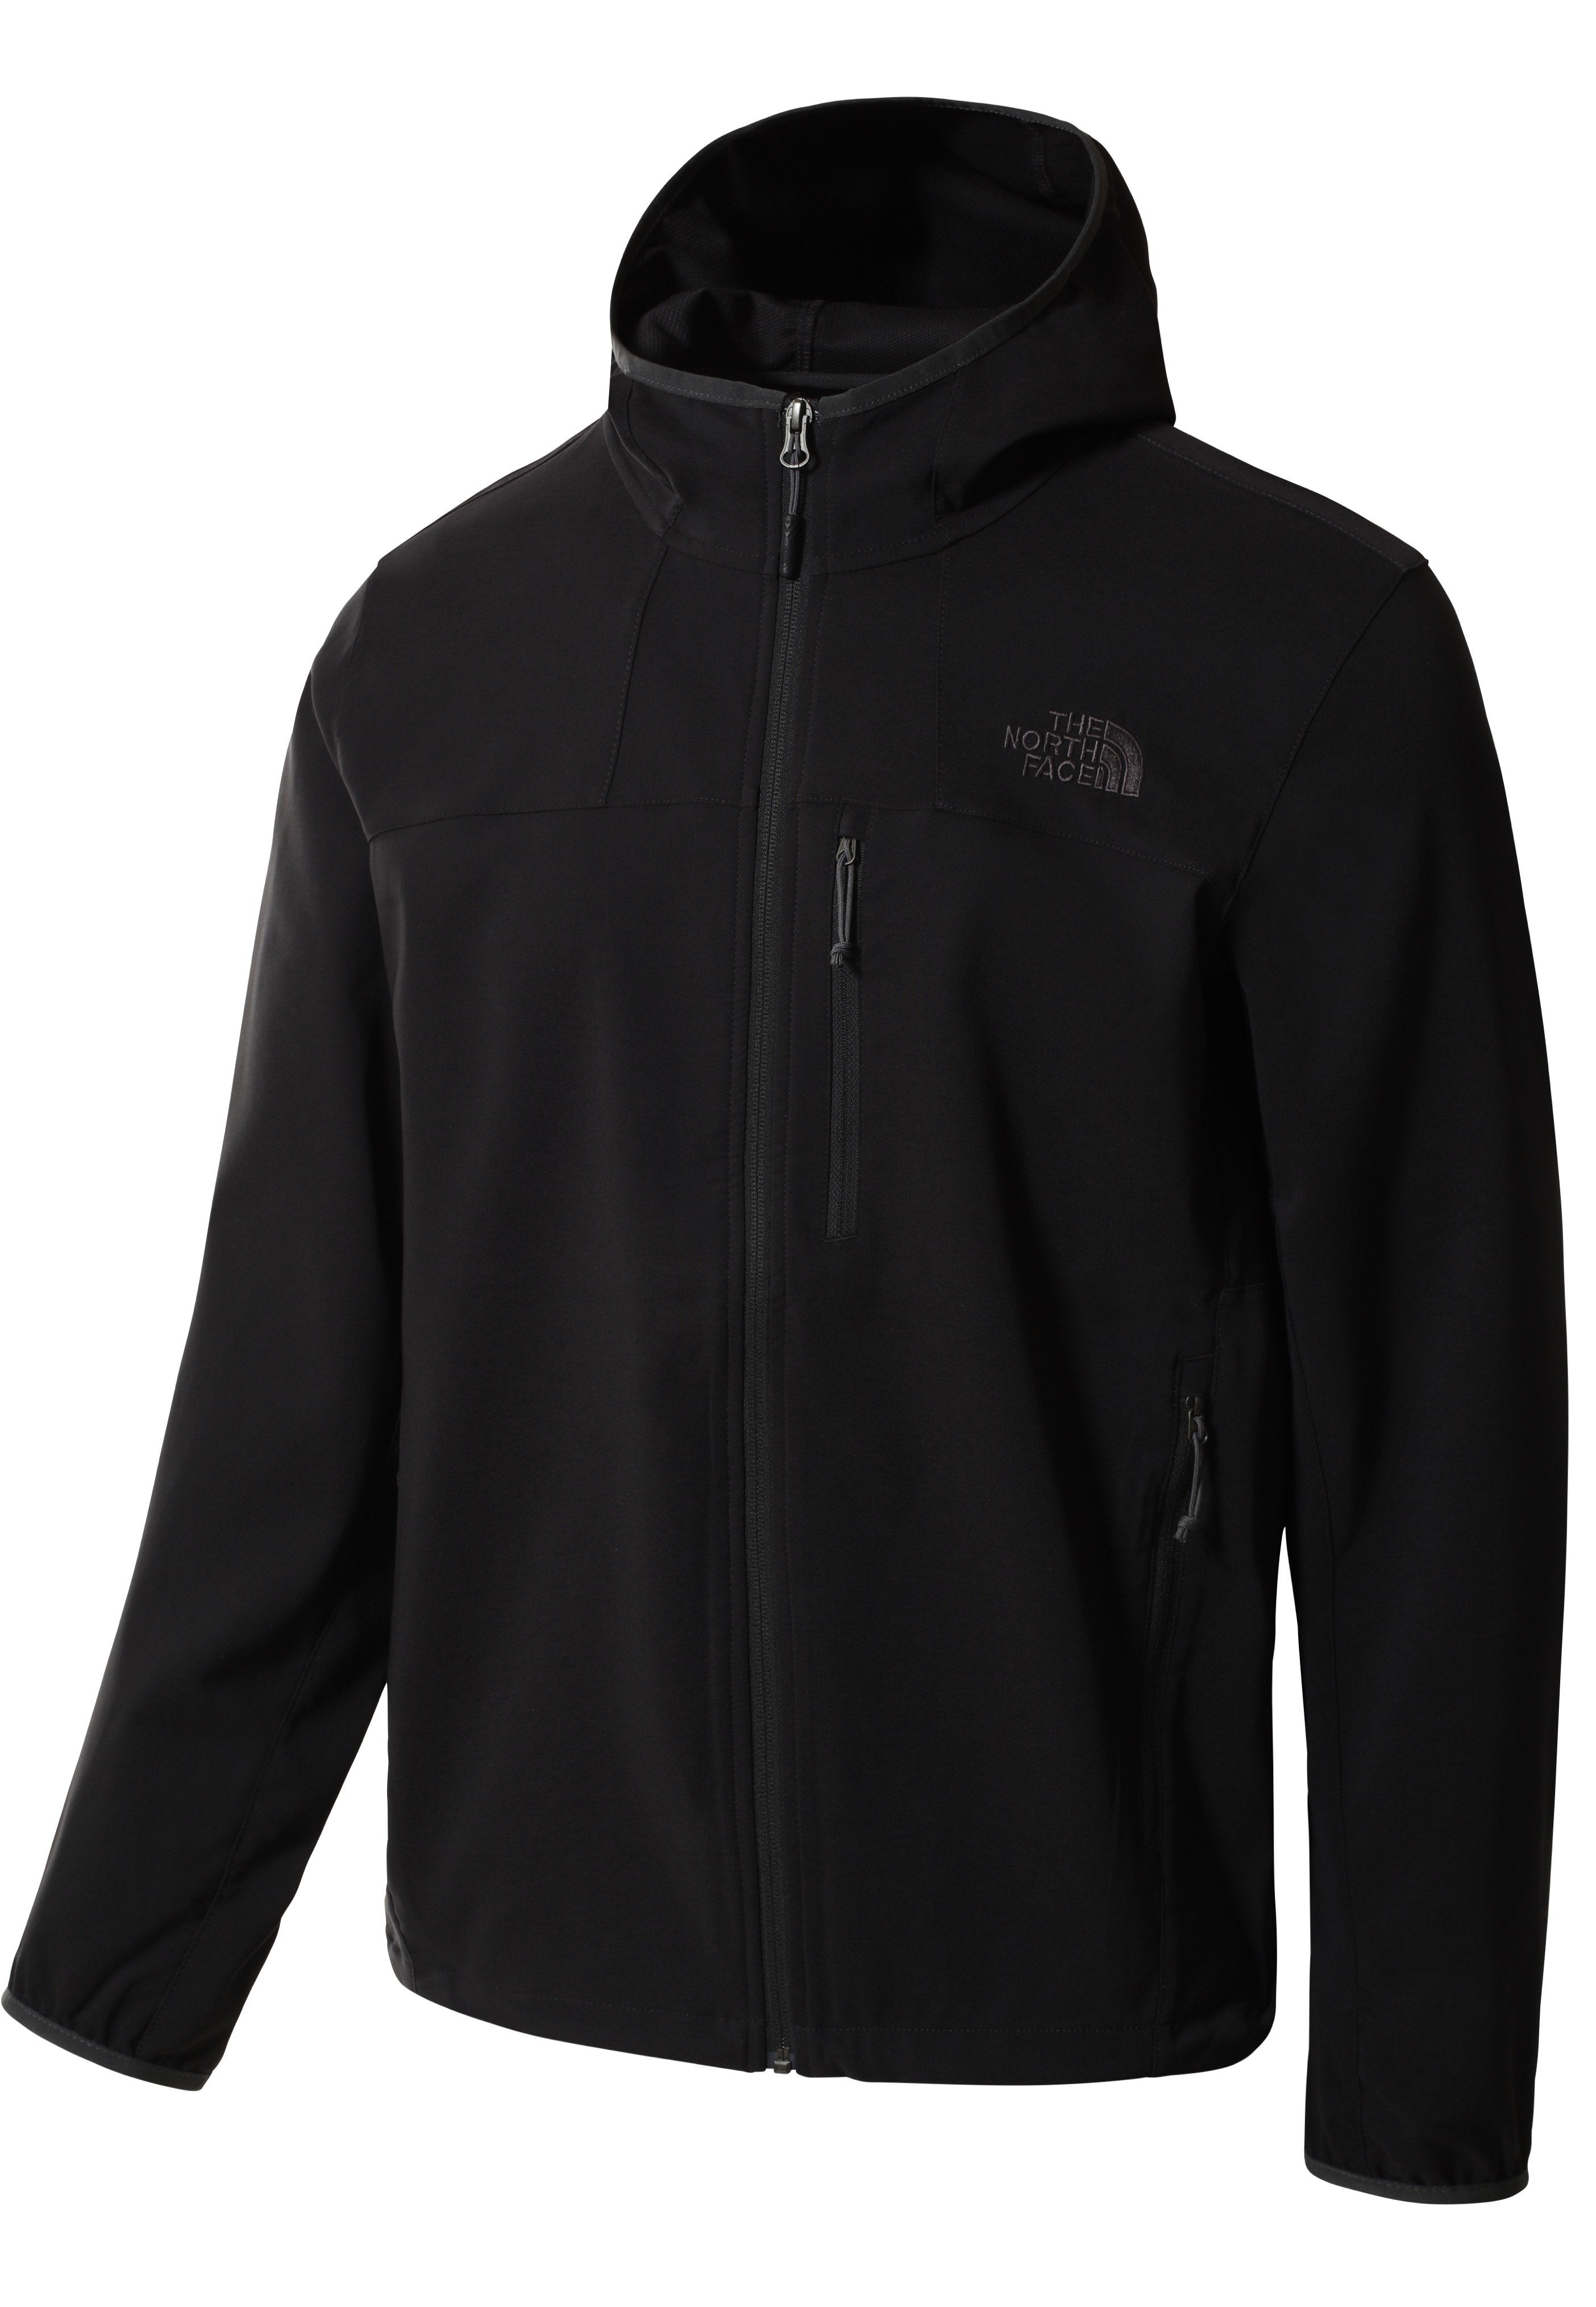 The North Face - Nimble Hoodie Tnf Black - Jacket